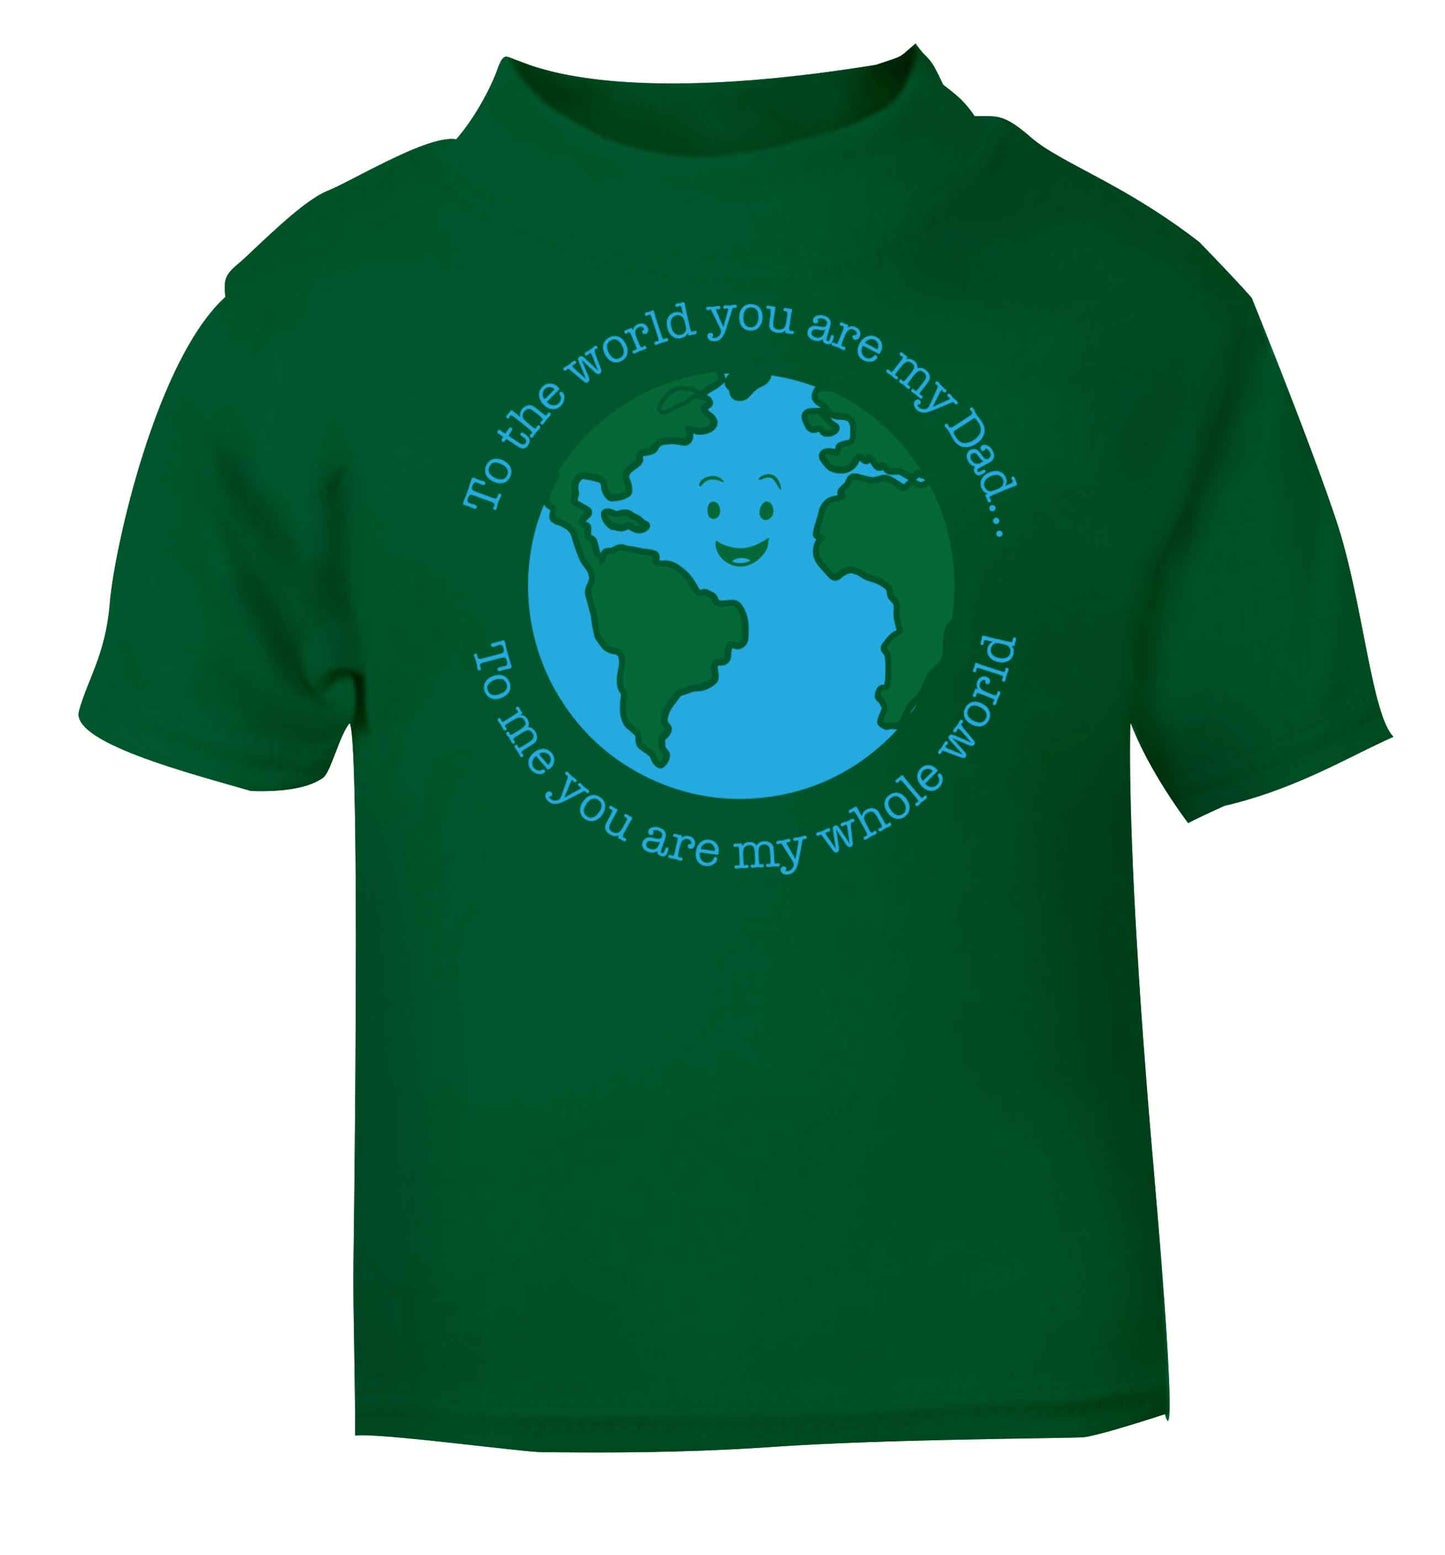 To the world you are my dad, to me you are my whole world green baby toddler Tshirt 2 Years